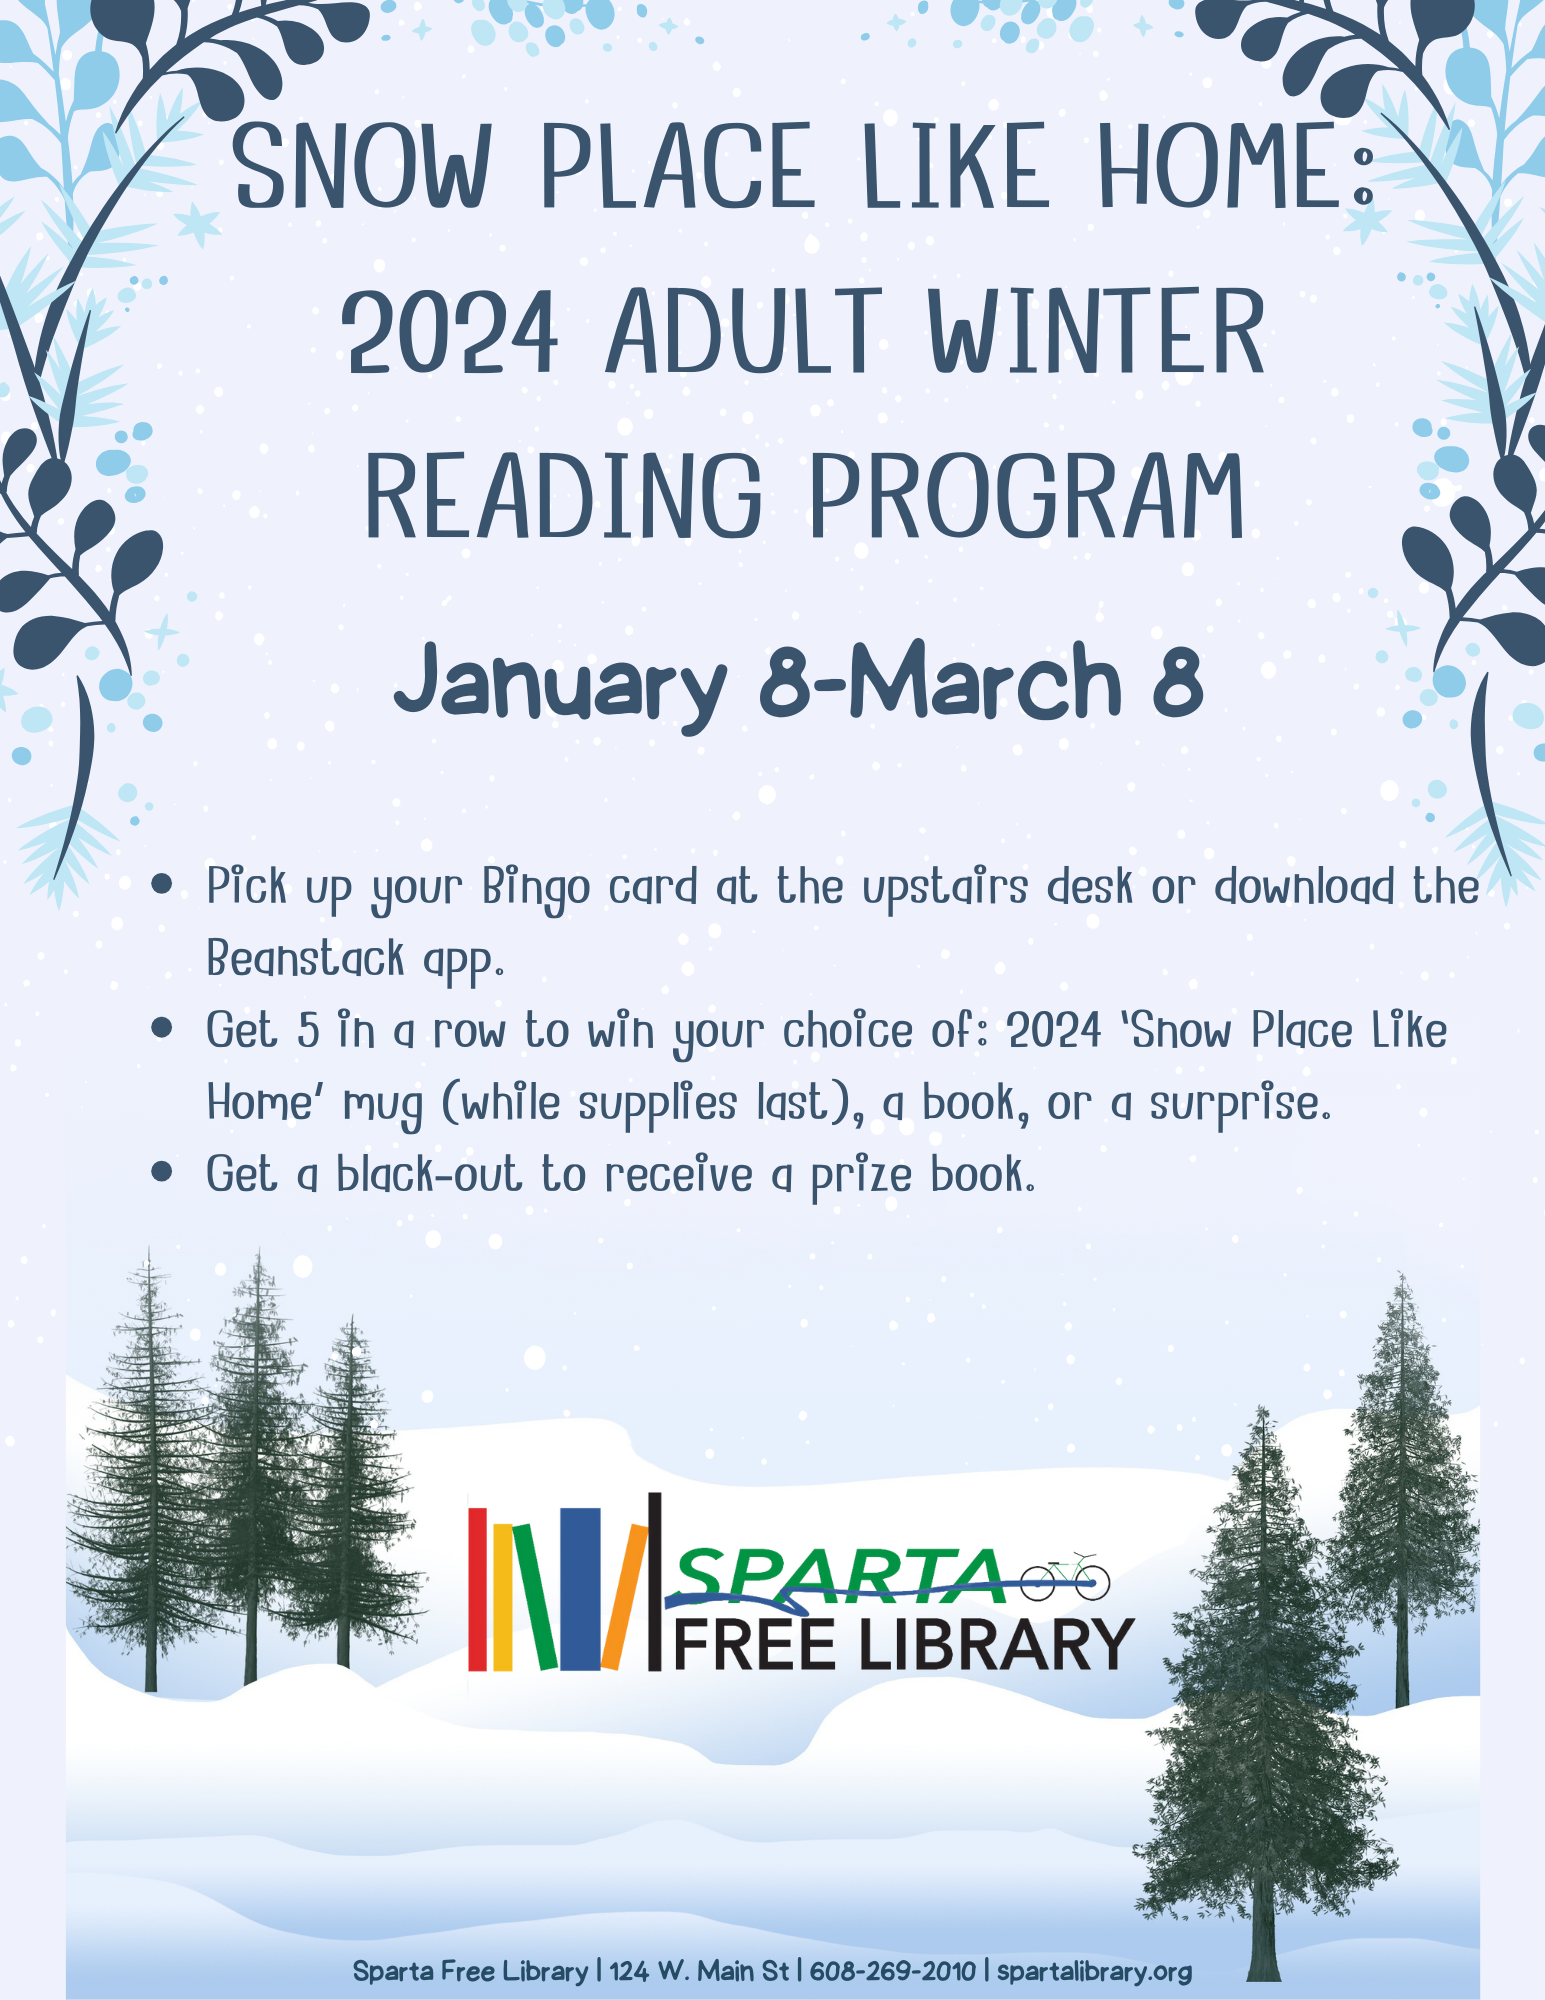 Read to win prizes! Pick up your Bingo card at the upstairs desk or download the Beanstack app. Get 5 in a row to win your choice of: 2024 Snow Place Like Home mug (while supplies last), a book, or a surprise. Get a black-out to receive a prize book.